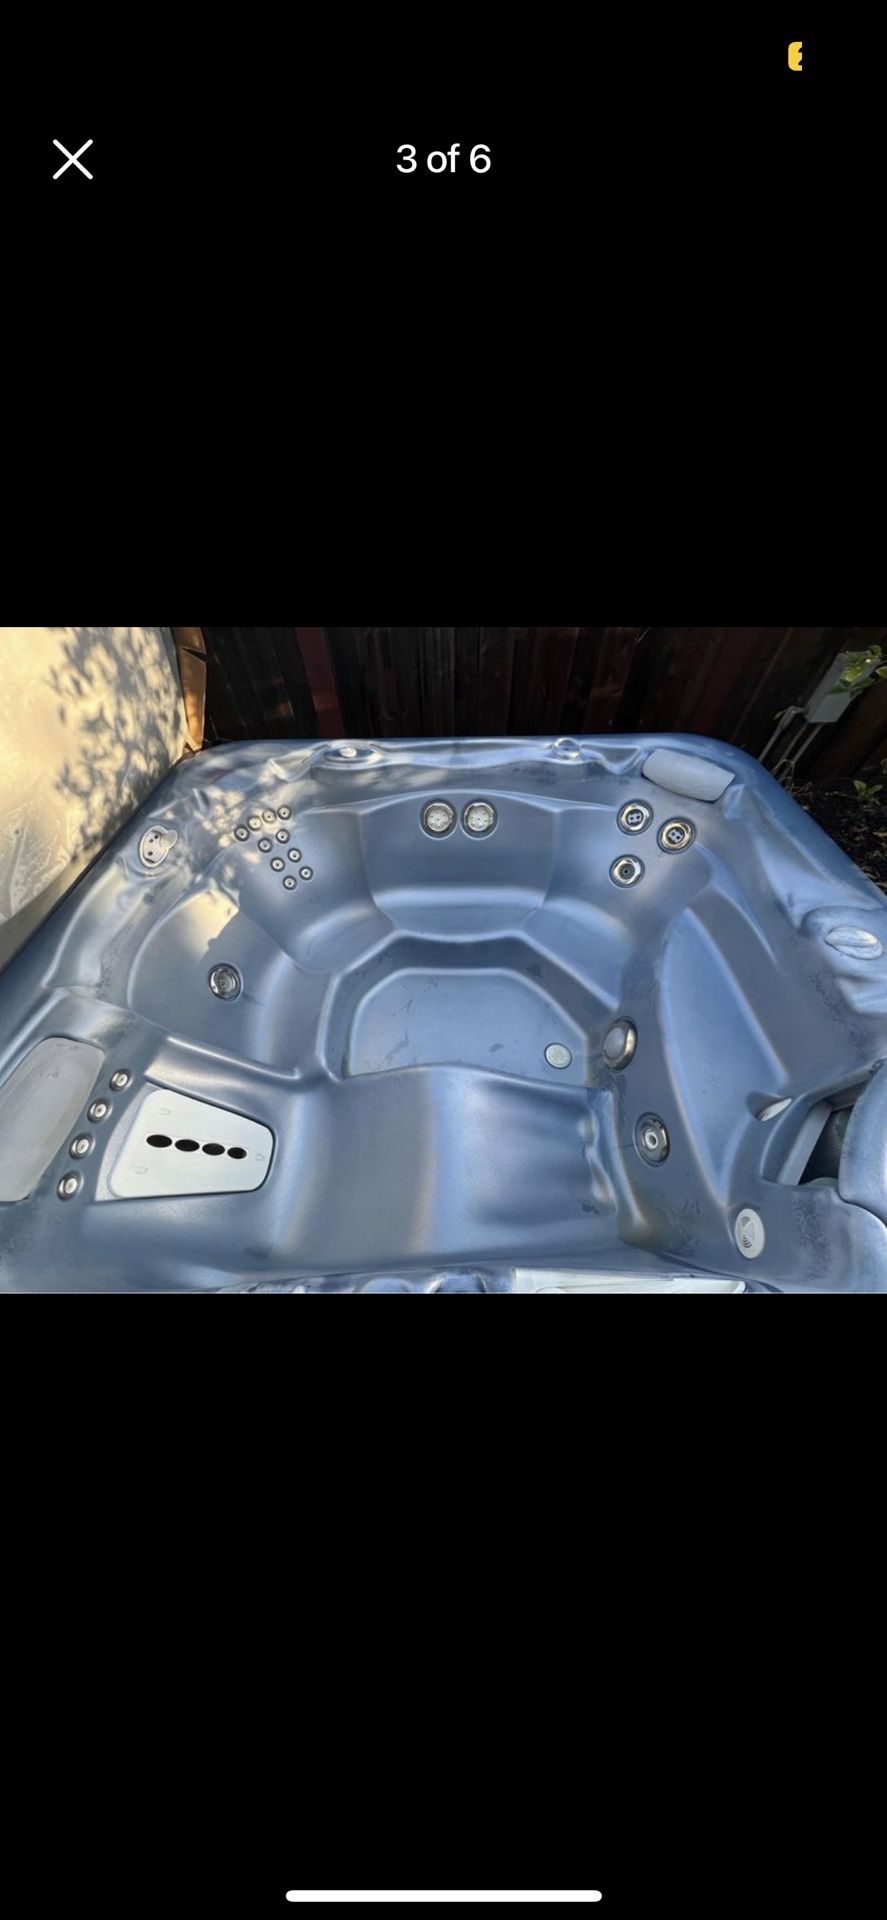 5 Seat Hot Springs  Sovereign Hot Tub!! Good Condition!!!!